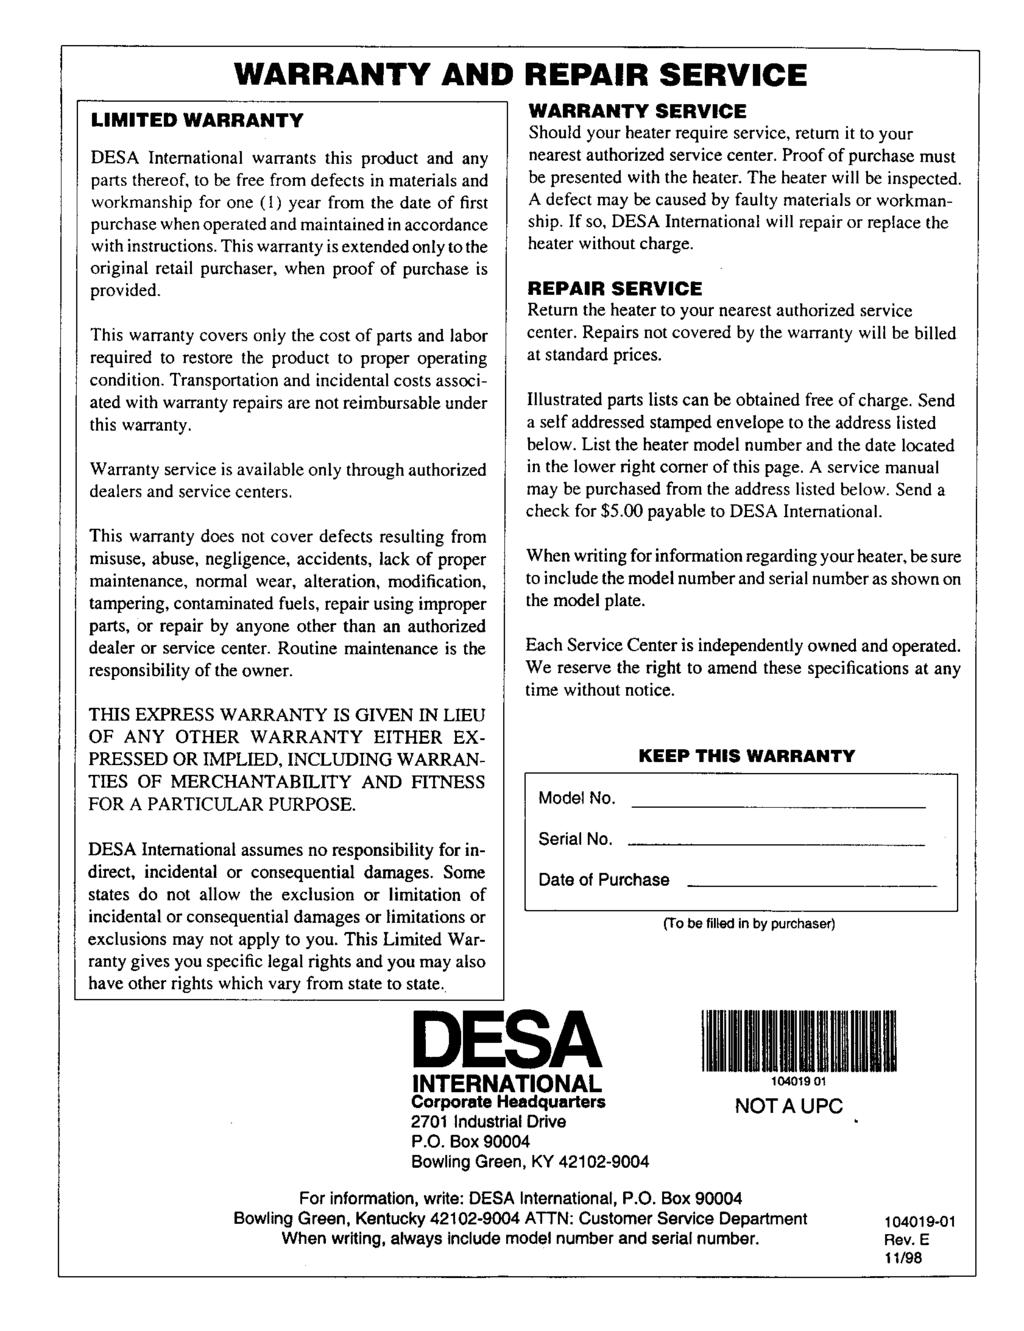 WARRANTY AND REPAIR SERVICE LIMITED WARRANTY DESA International warrants this product and any parts thereof, to be free from defects in materials and workmanship for one () year from the date of